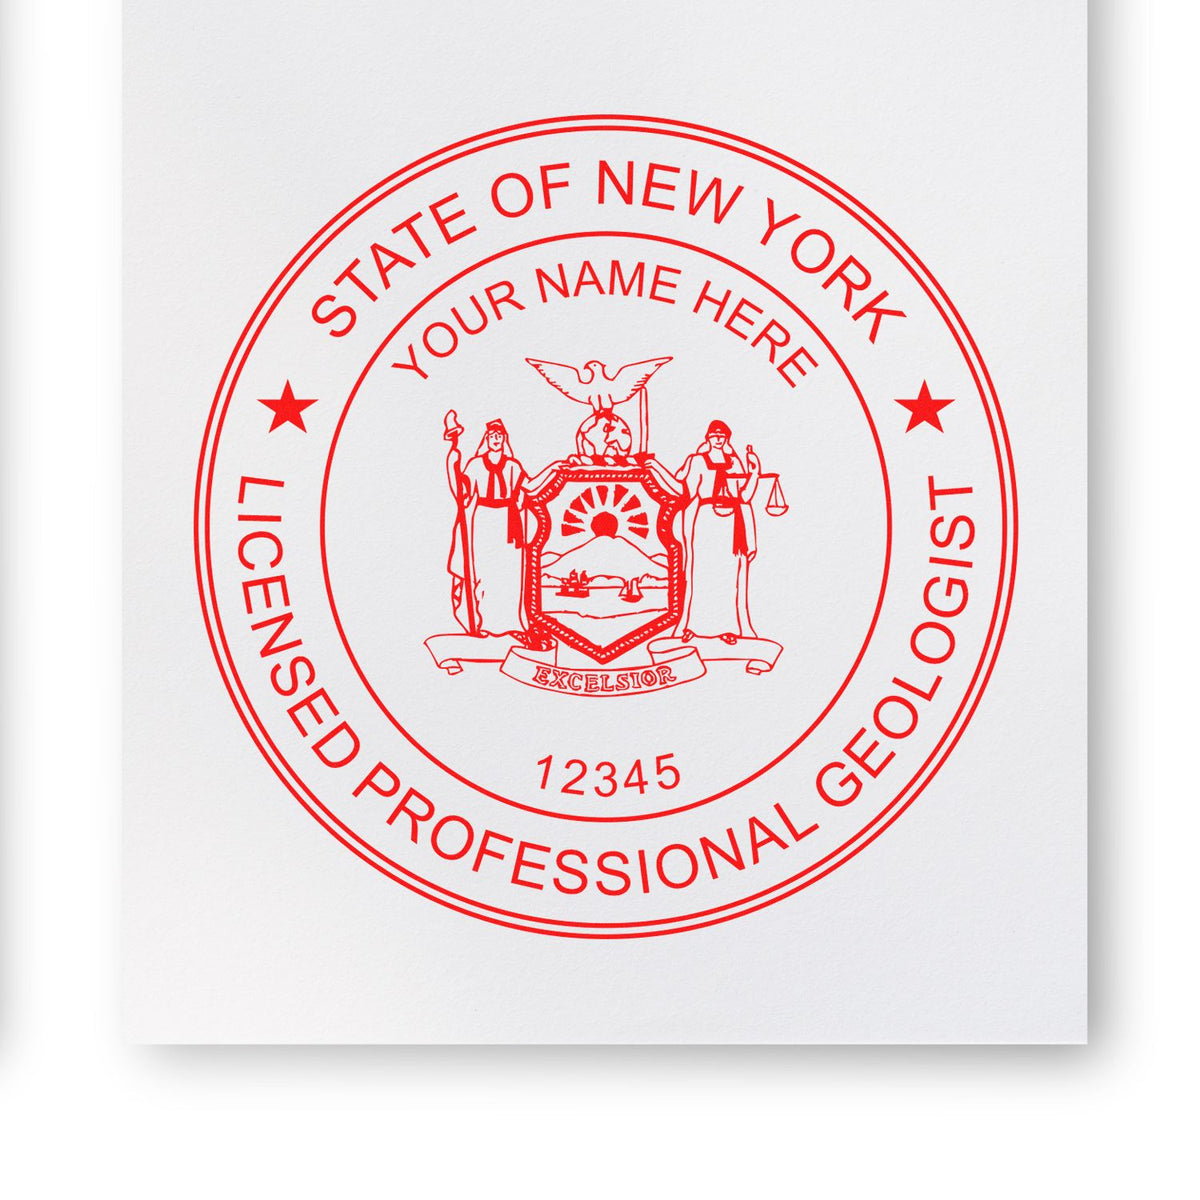 An in use photo of the Digital New York Geologist Stamp, Electronic Seal for New York Geologist showing a sample imprint on a cardstock